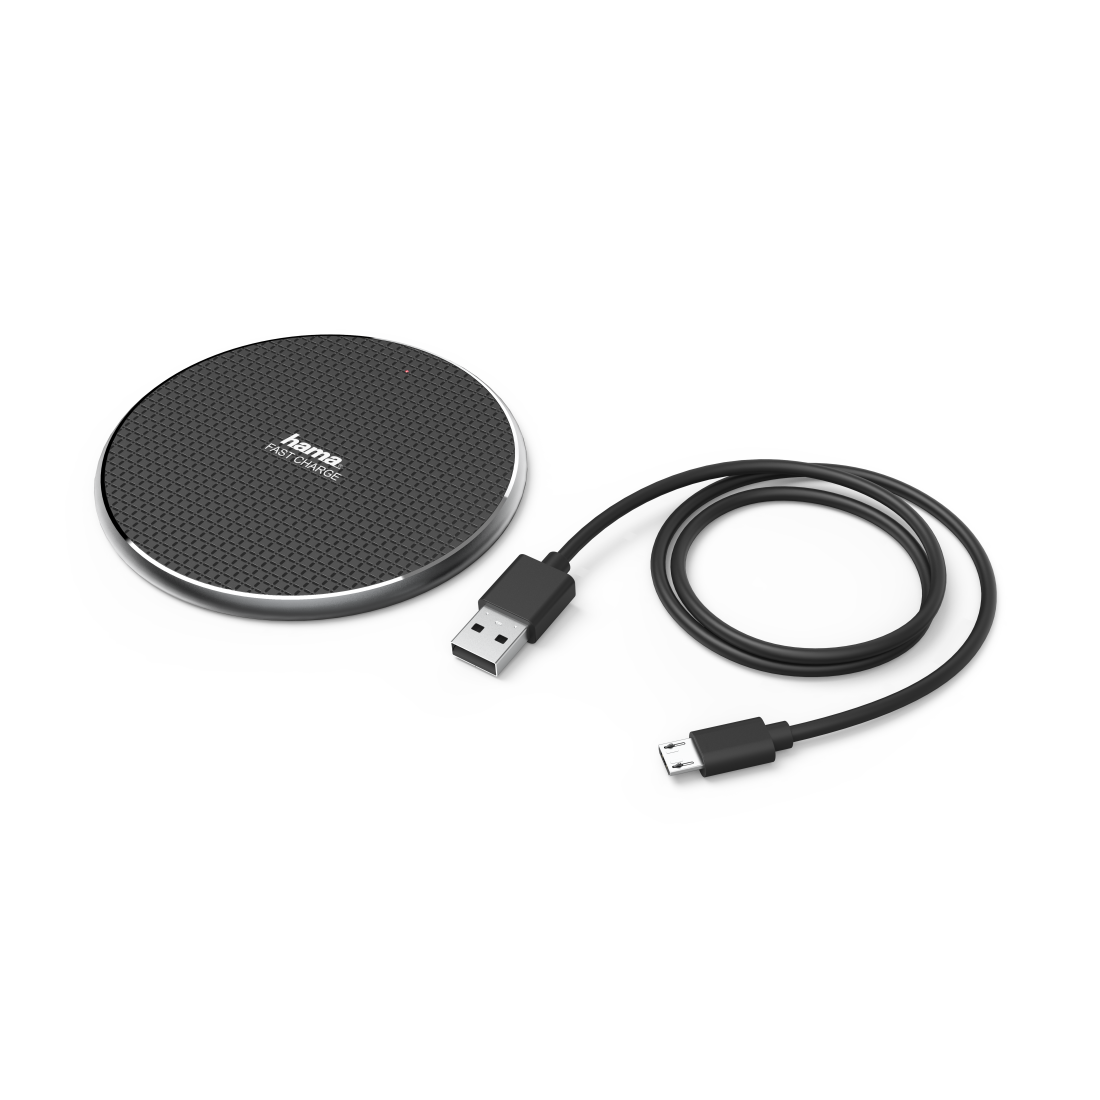 Hama Qi-FC10 Wireless Charger (Black) | Smart Home Sounds